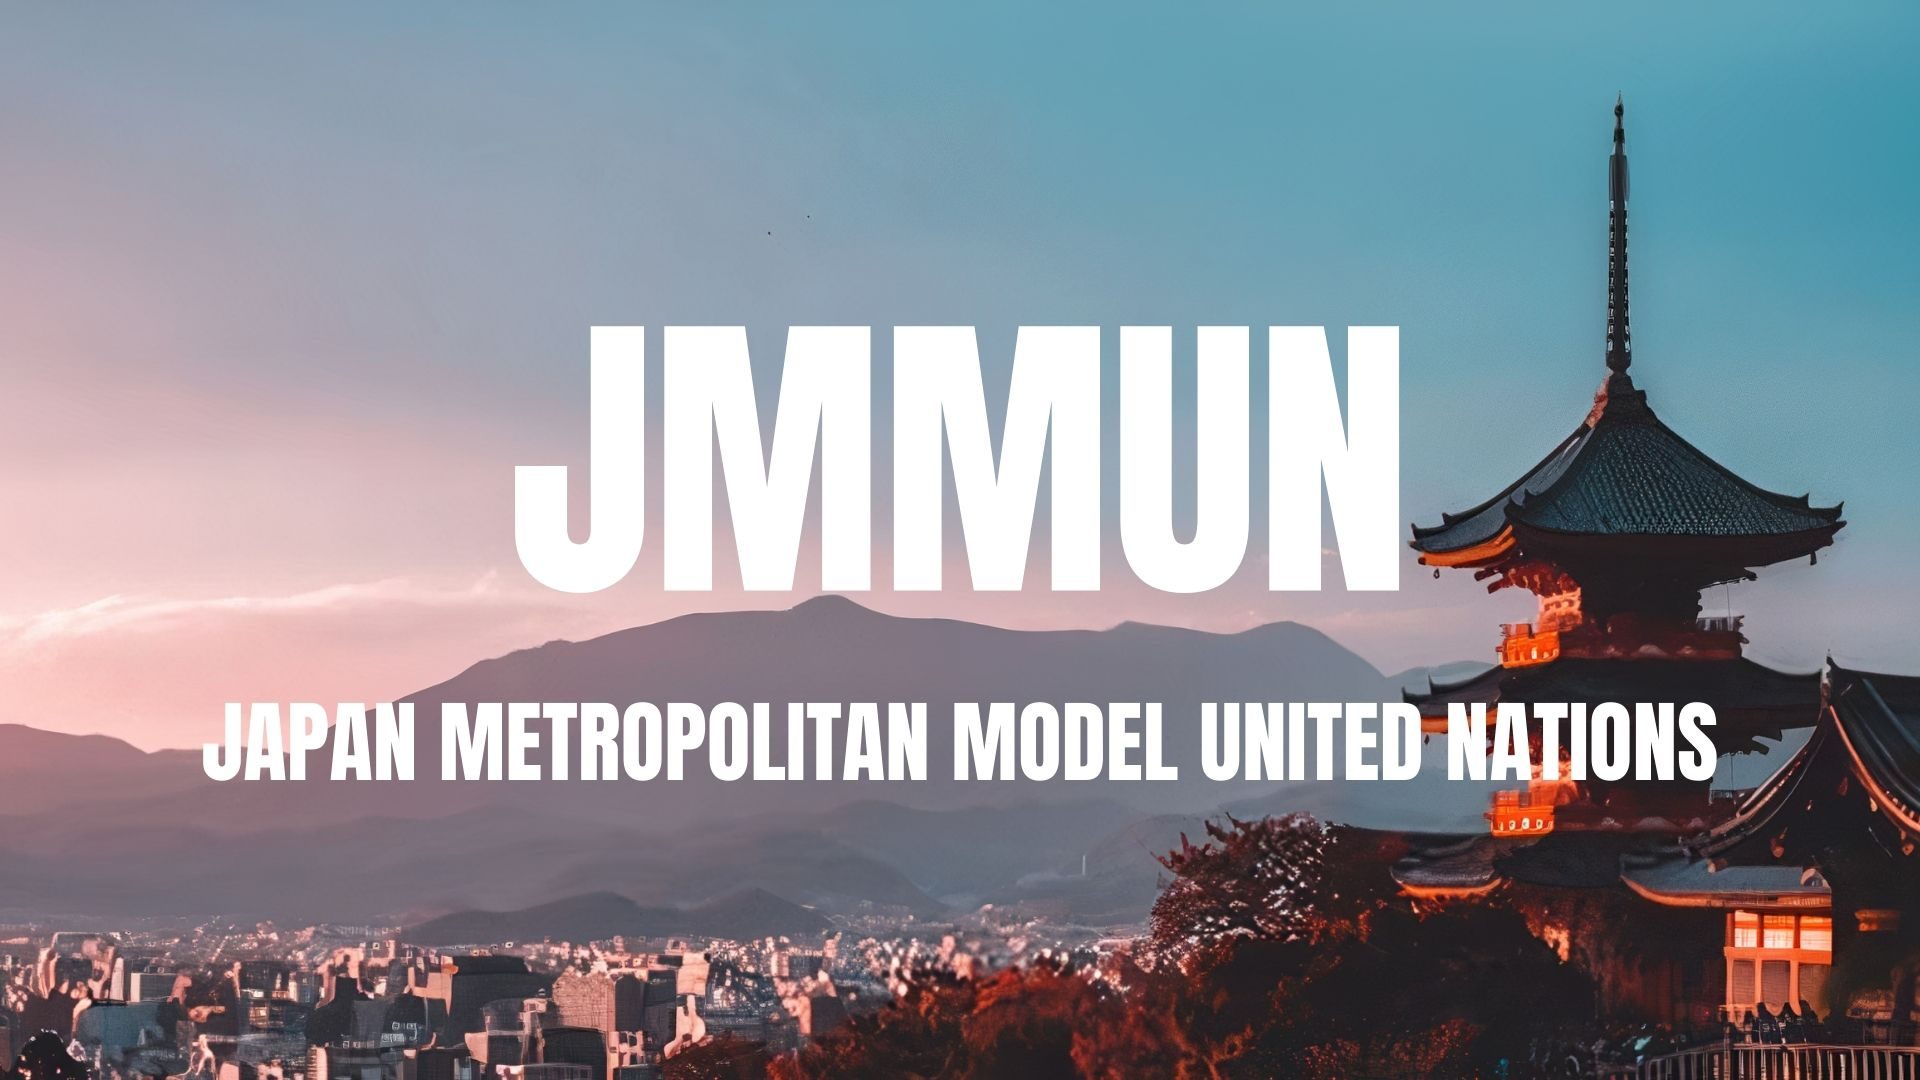 JMMUN 2019 has ended successfully!